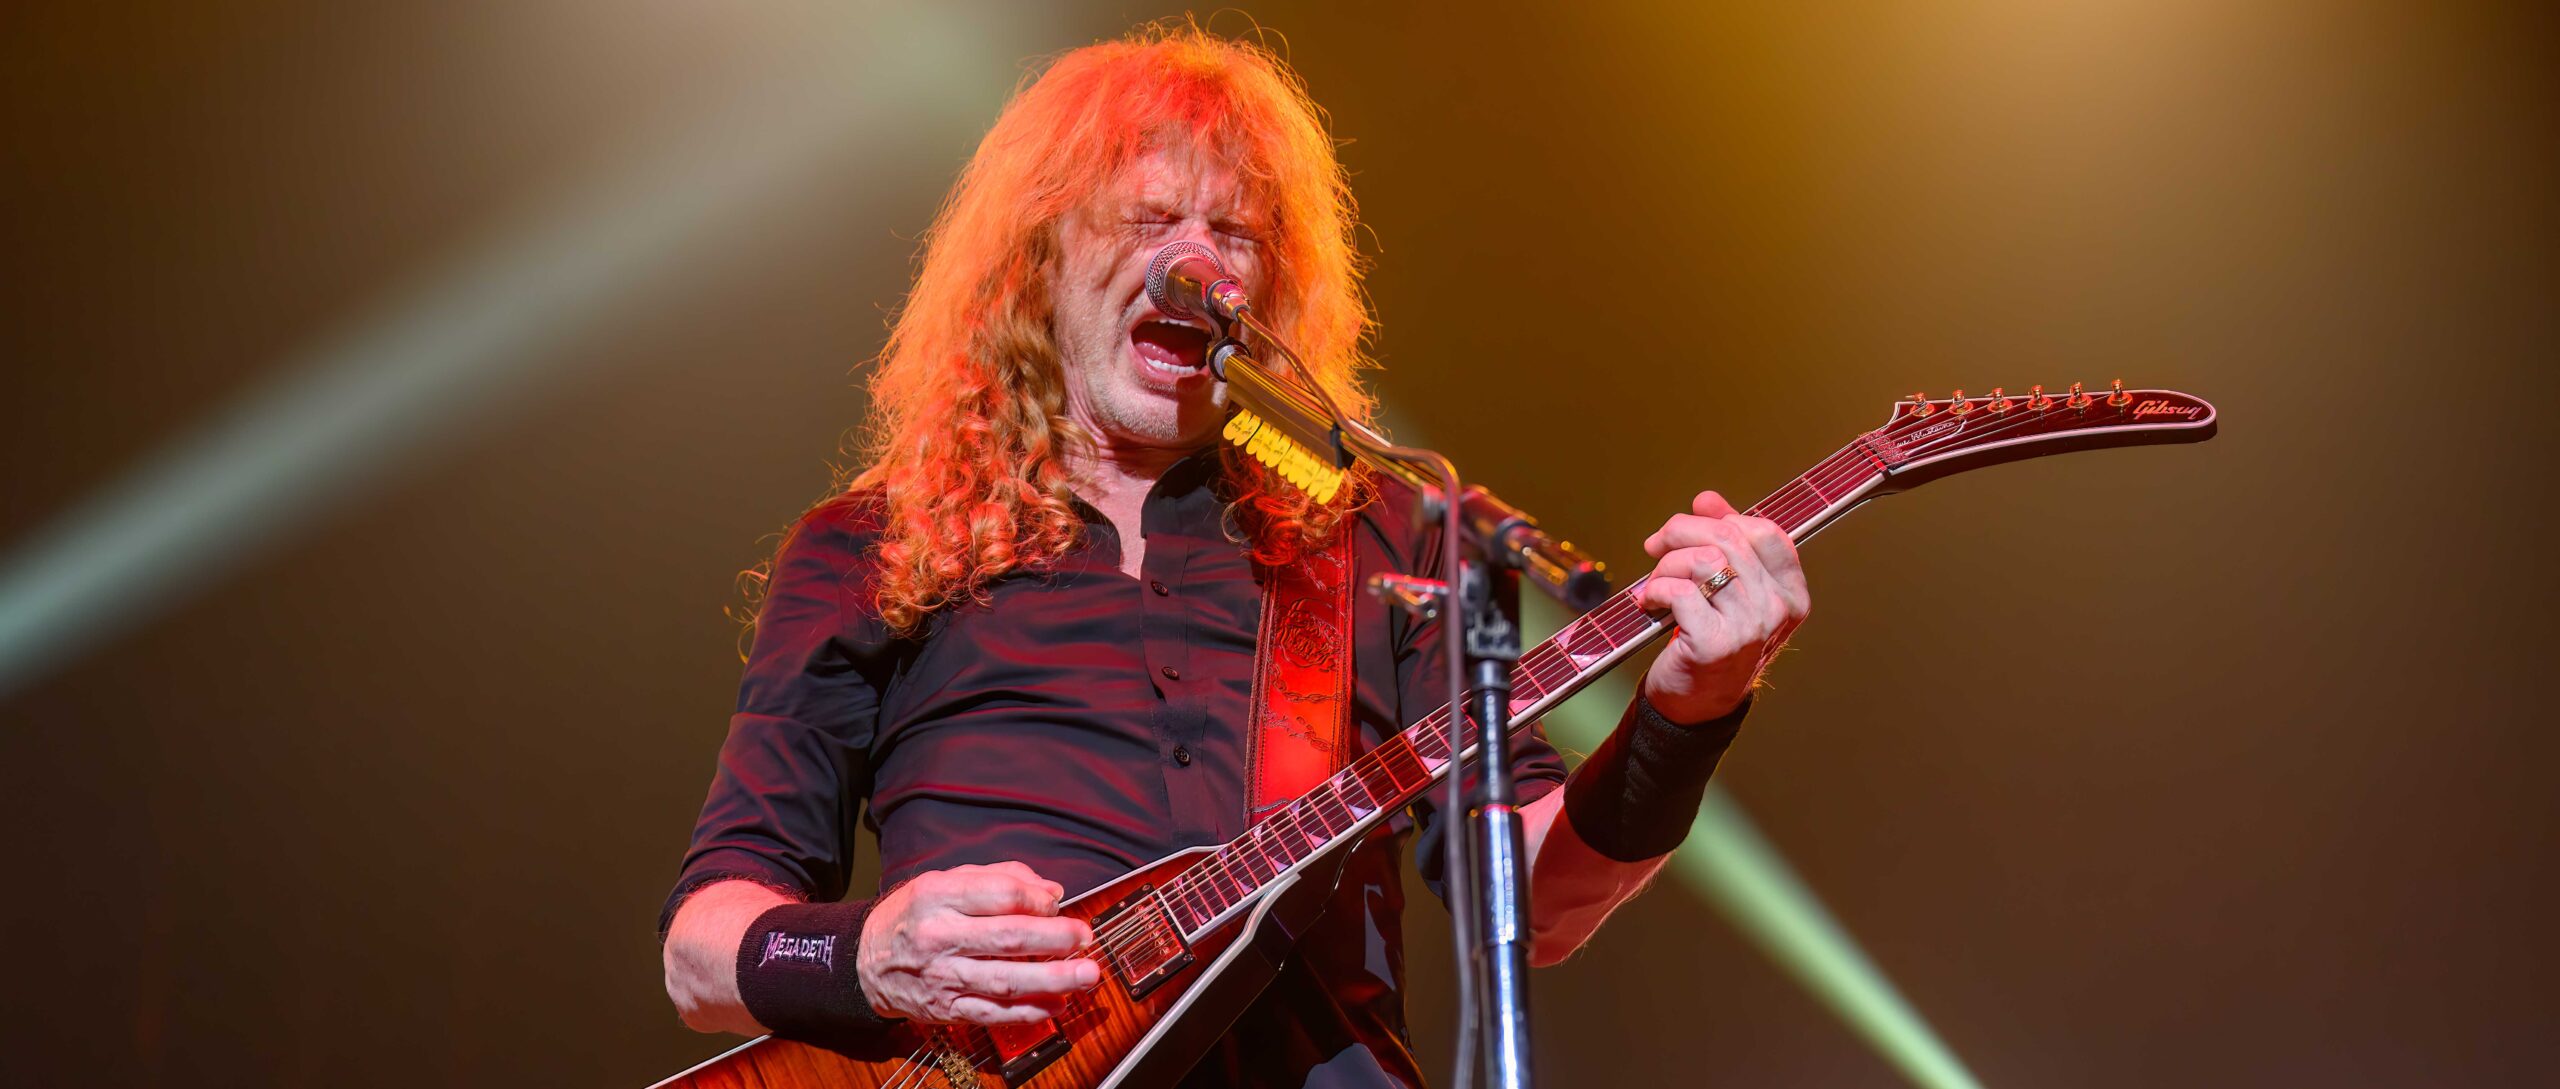 Reviews  Live Review: Megadeth + Bullet For My Valentine + ONI